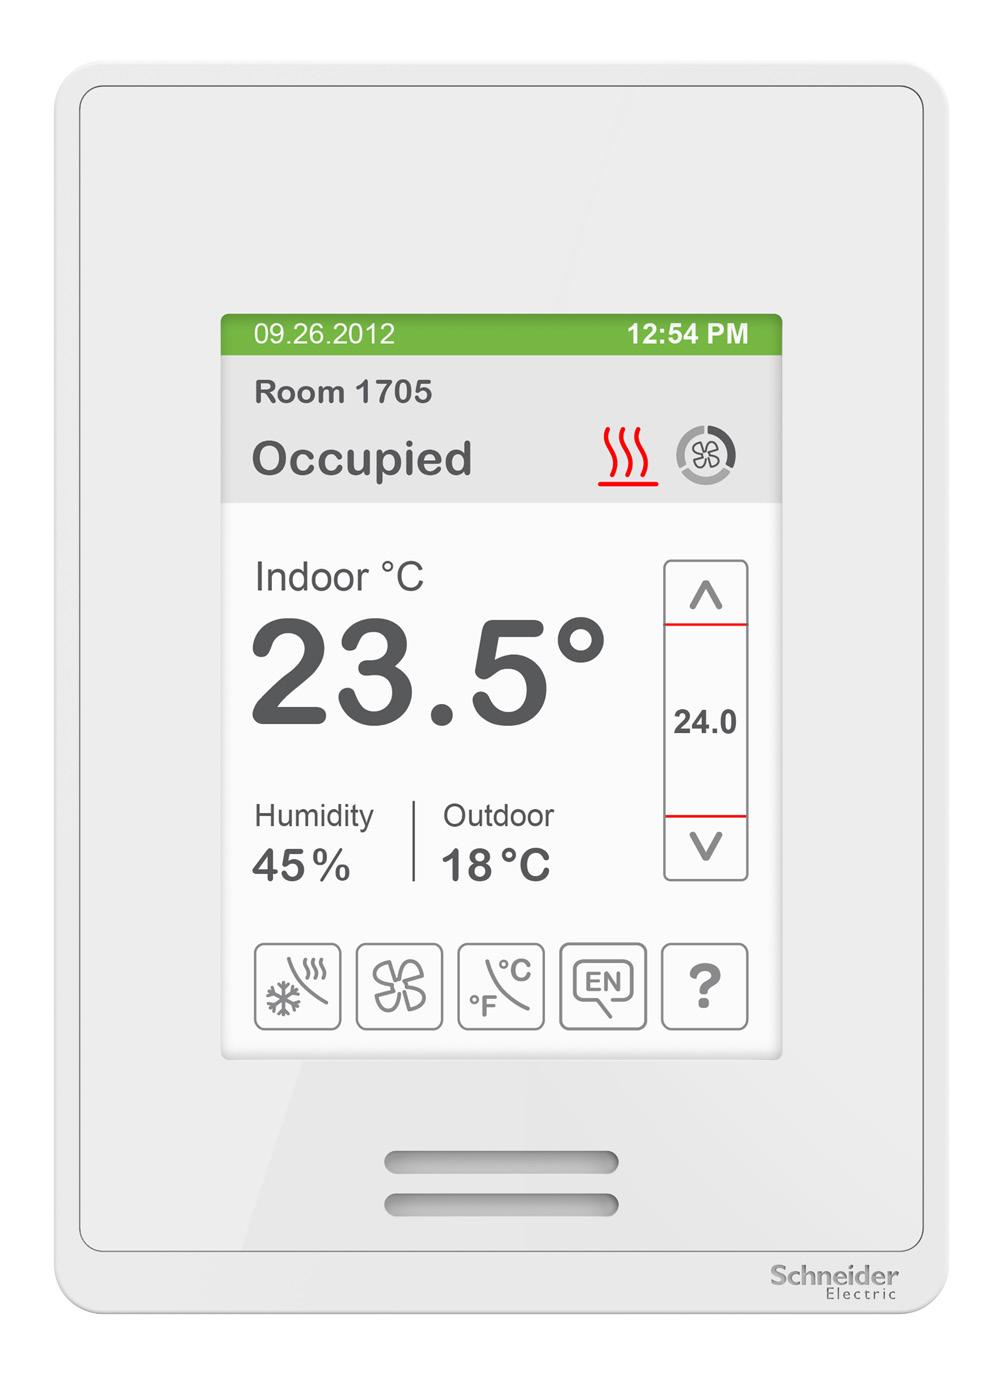 HOME SCREEN DISPLAY Hospitality User Interface Shown Date Short Network Message Occupancy Status Time System Status Fan Status Room Indoor Temperature Room Indoor Humidity Outdoor Temperature Up